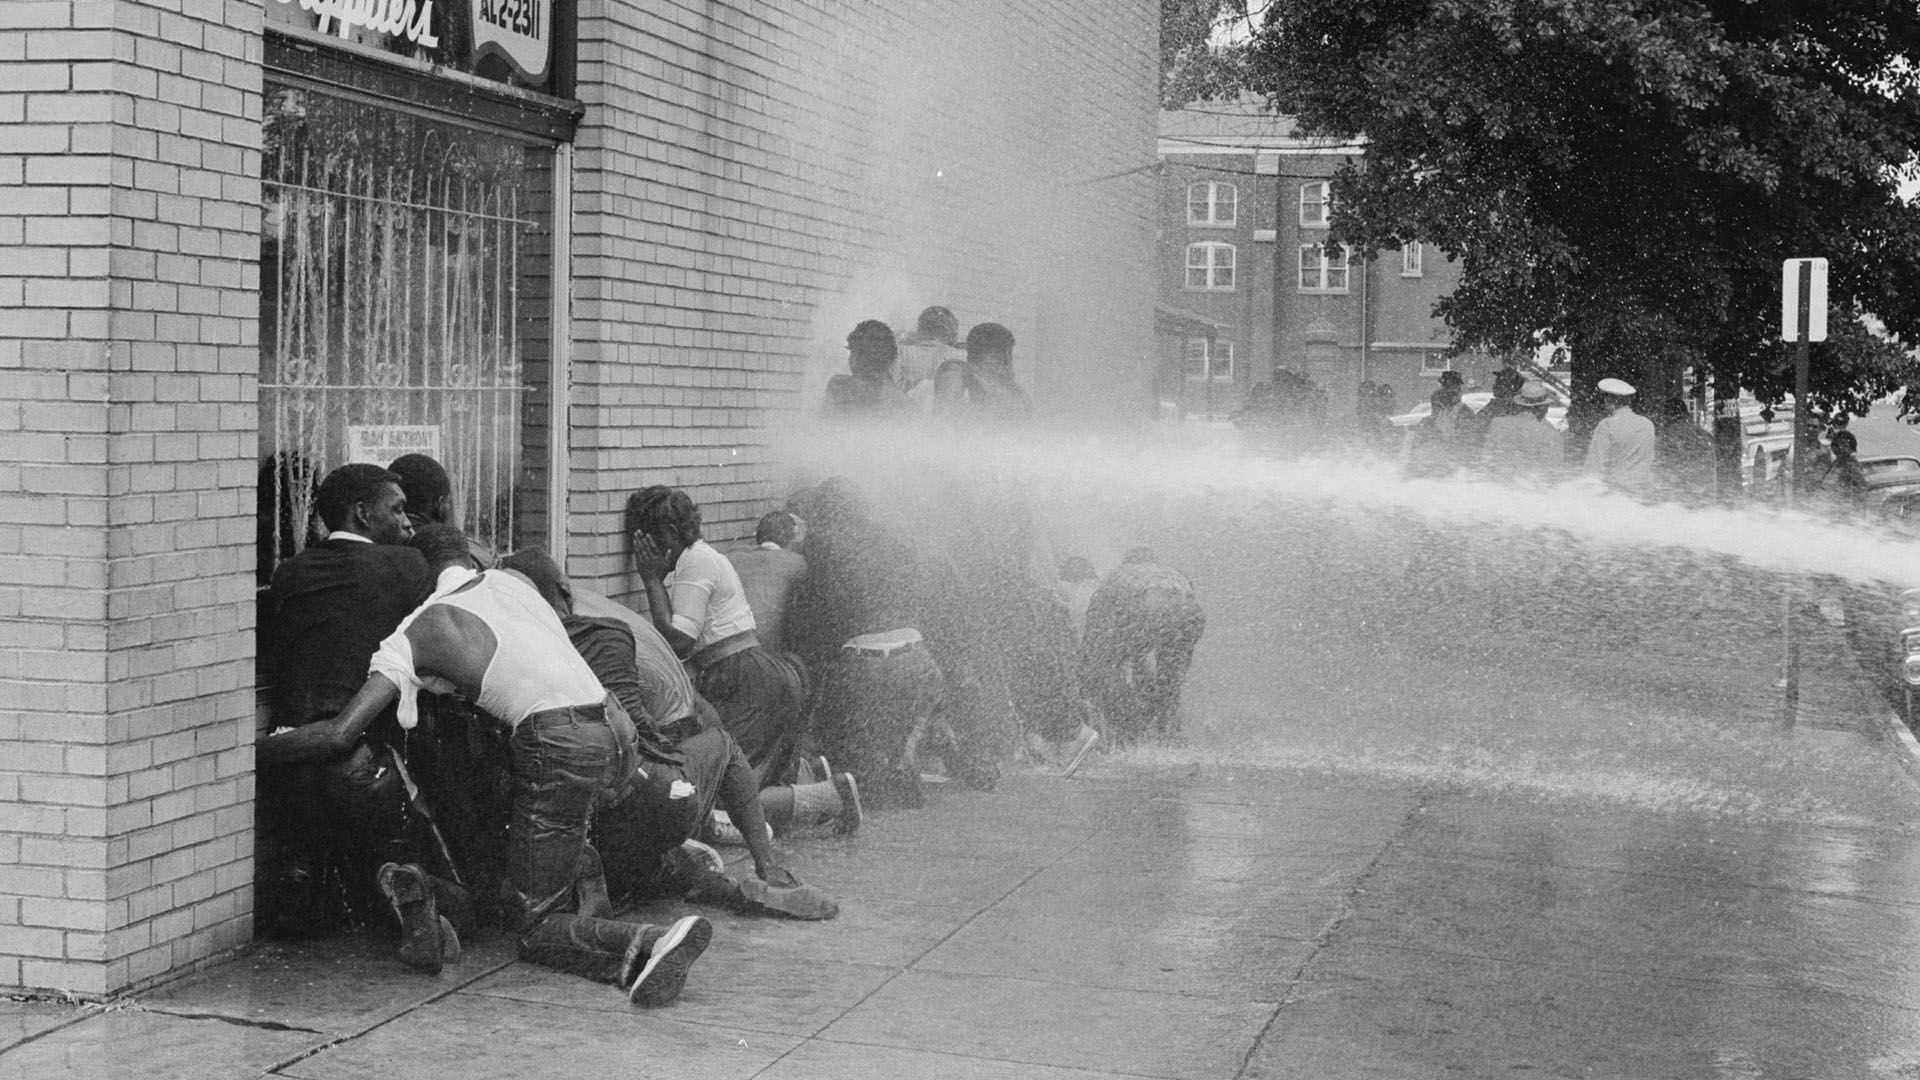 Firefighters spray protesters during the Birmingham Campaign in Alabama in May 1963